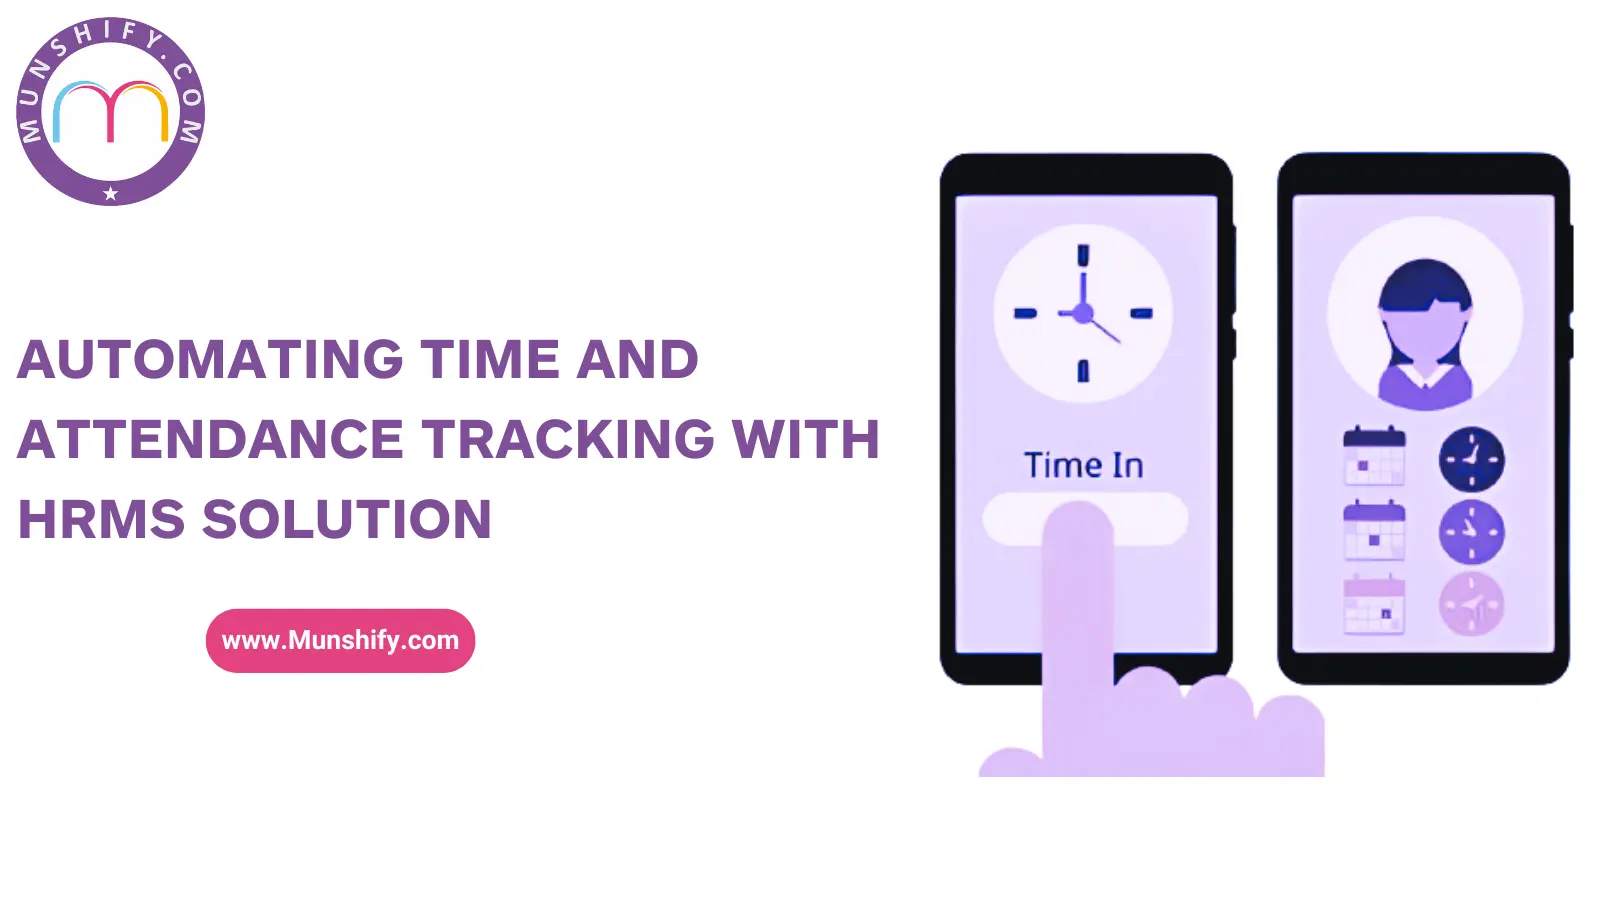 Automating Time and Attendance Tracking with HRMS Solution